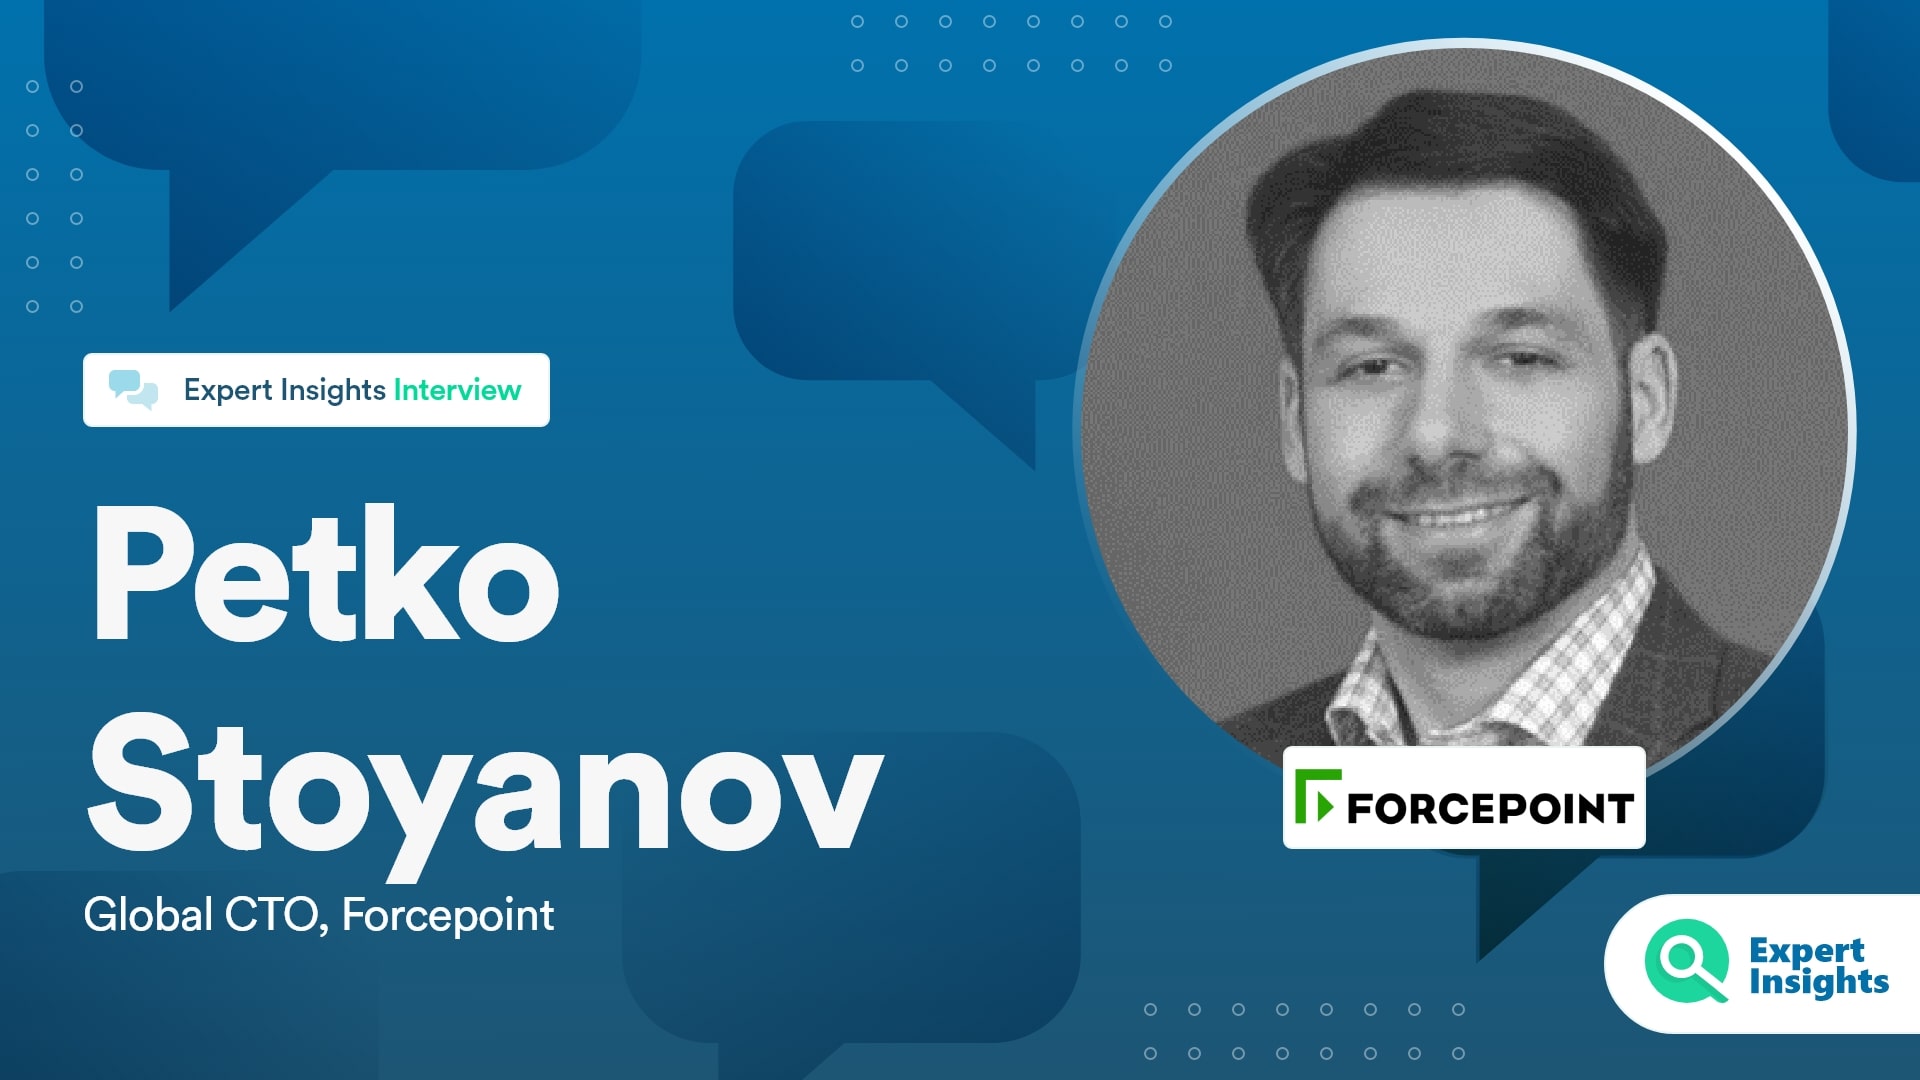 Expert Insights Interview With Petko Stoyanov Of Forcepoint